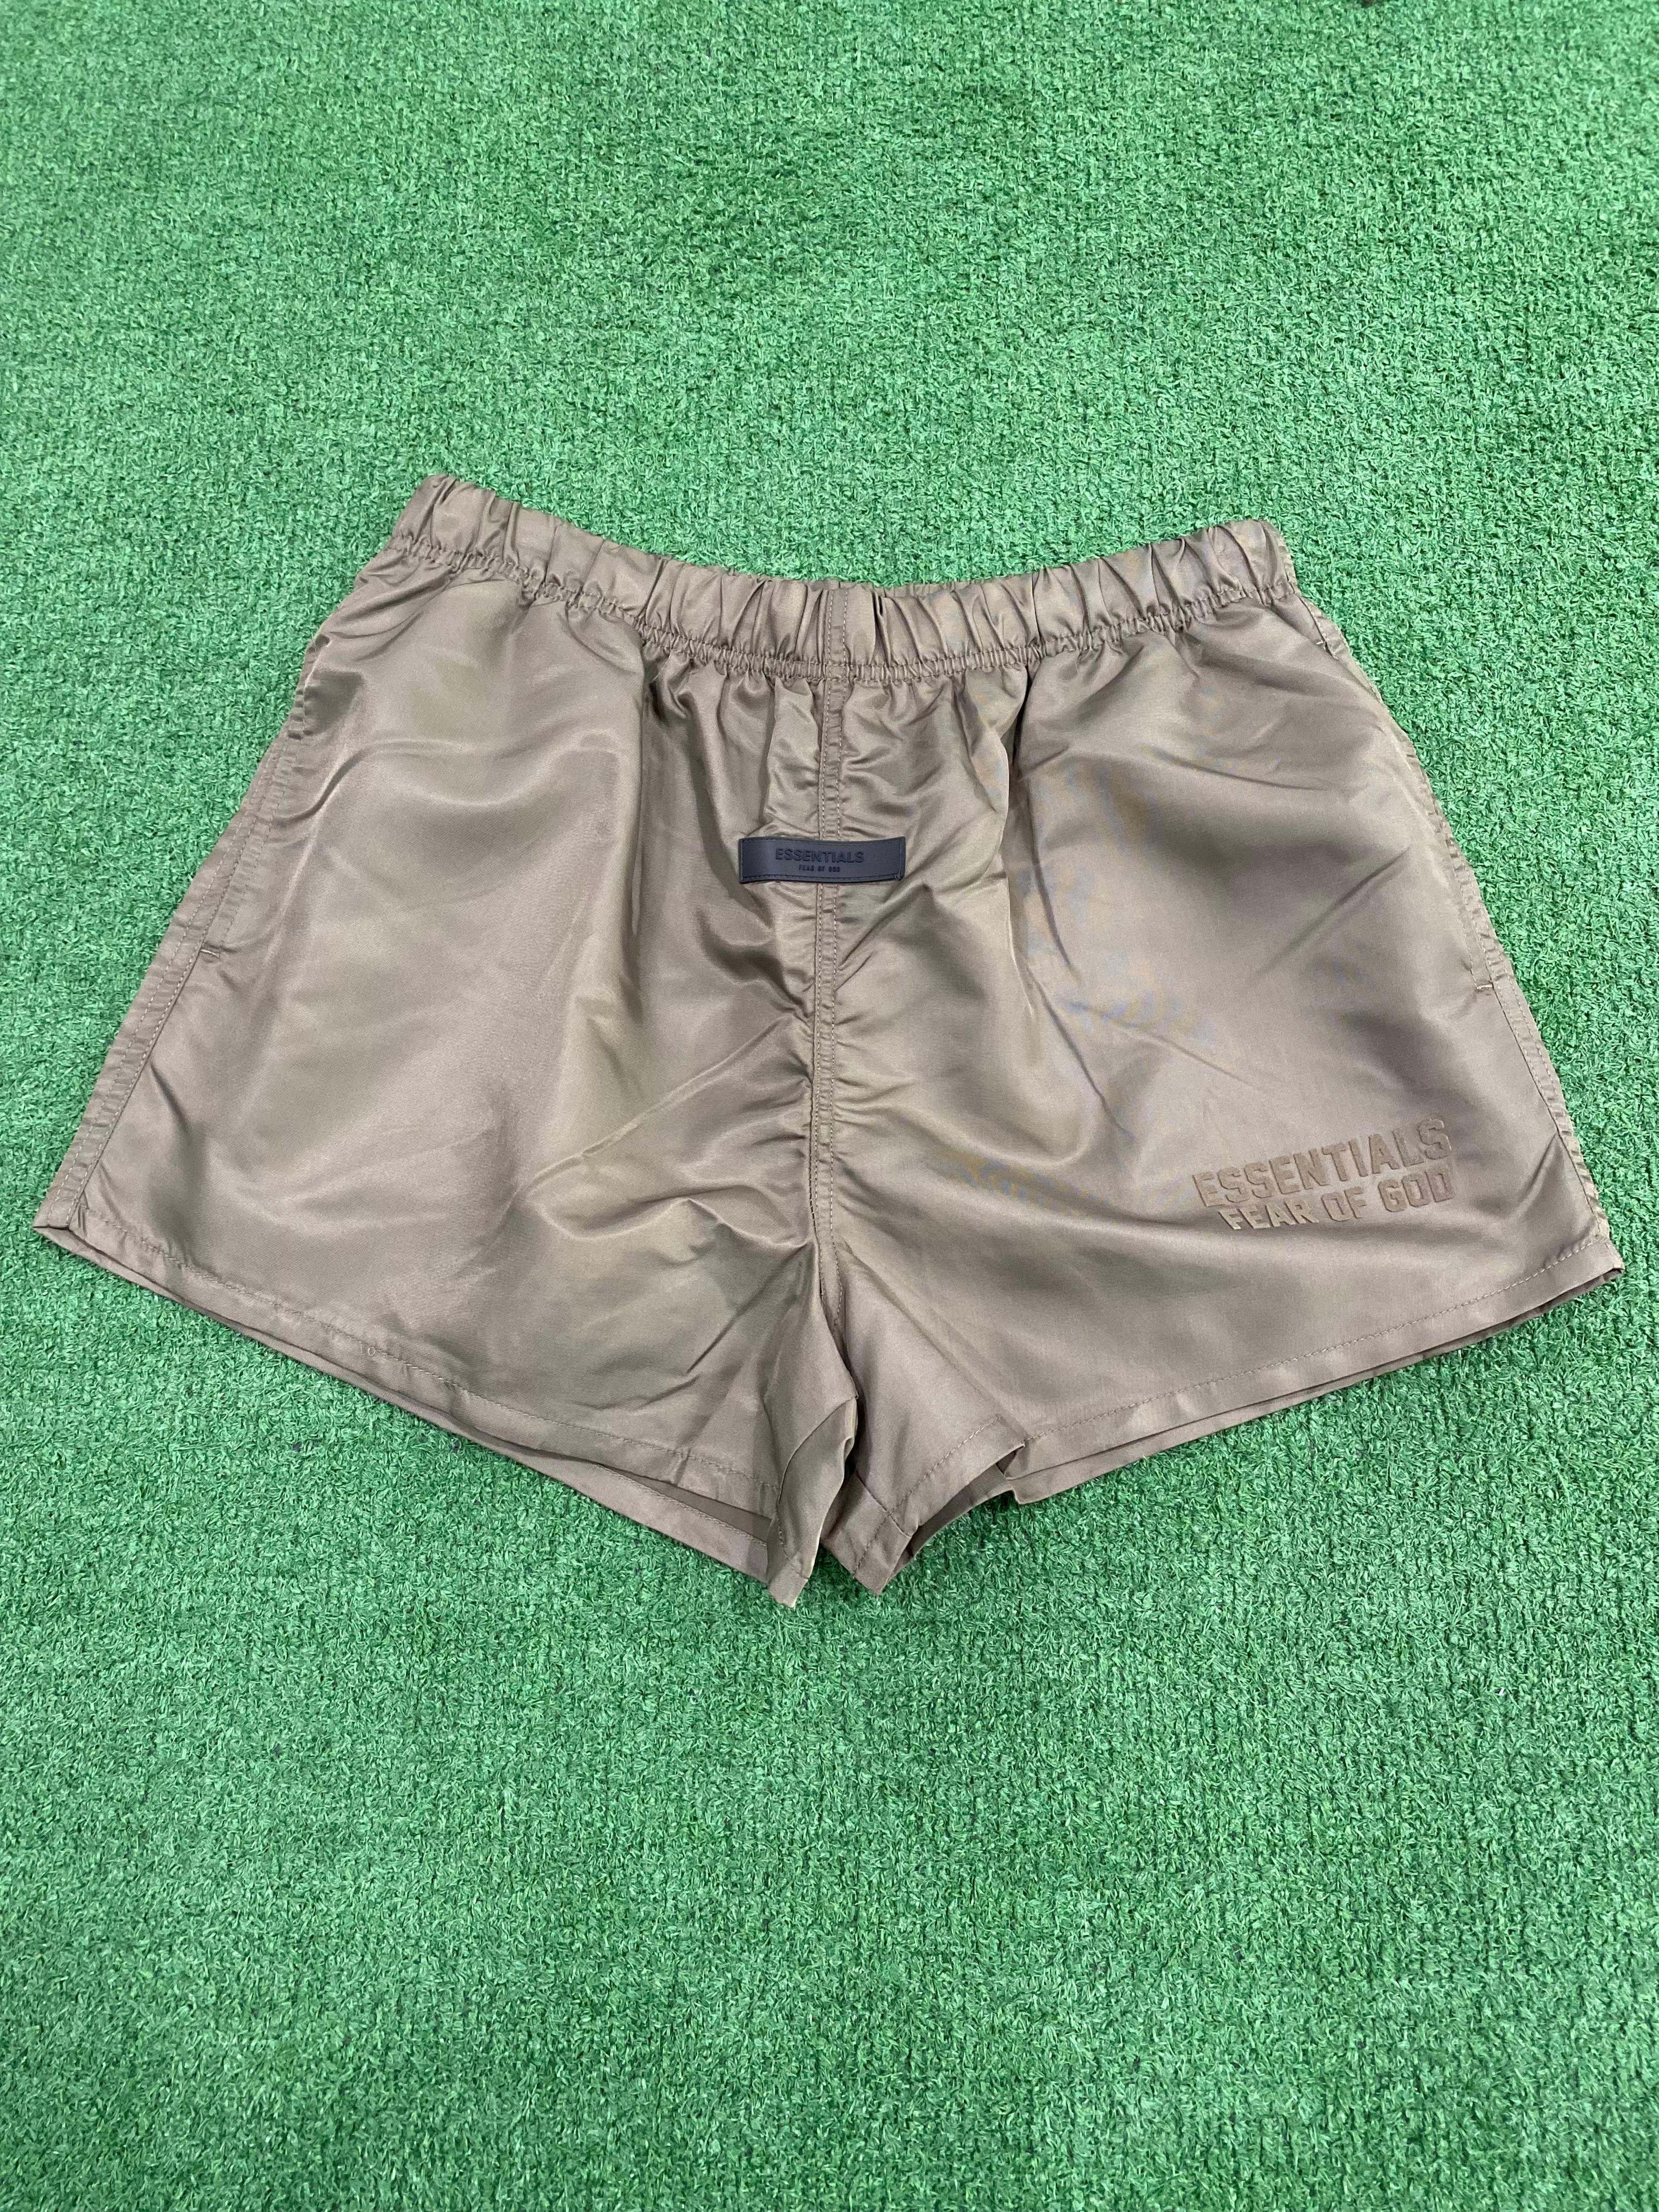 Alternate View 1 of Fear of God Essentials Nylon Running Shorts Wood